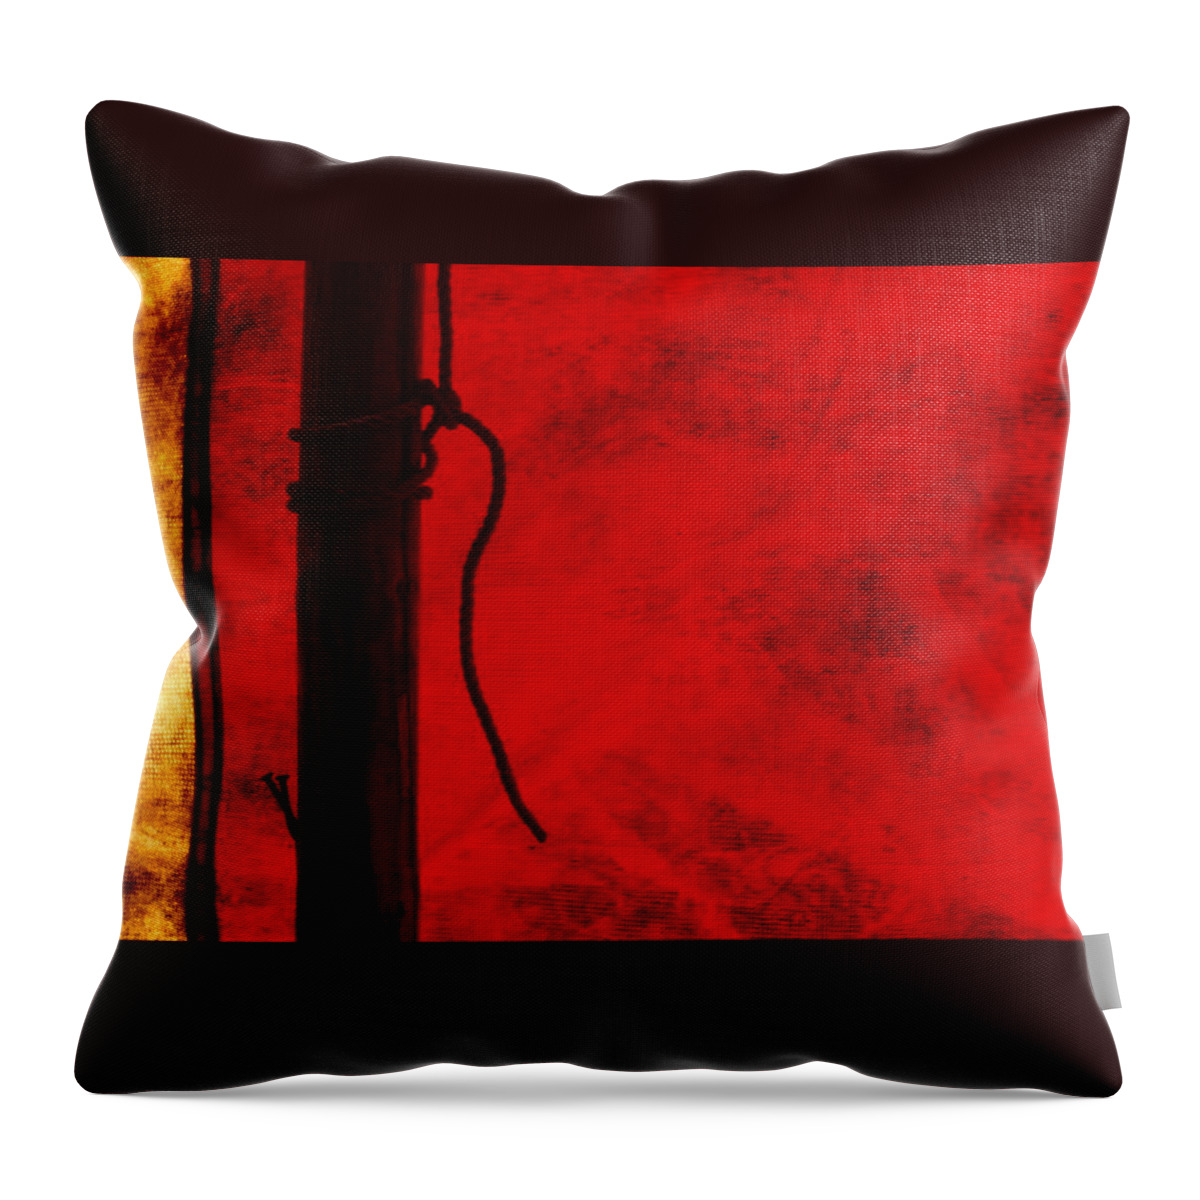 Tent Throw Pillow featuring the photograph Red Tent Stake by Marty Klar